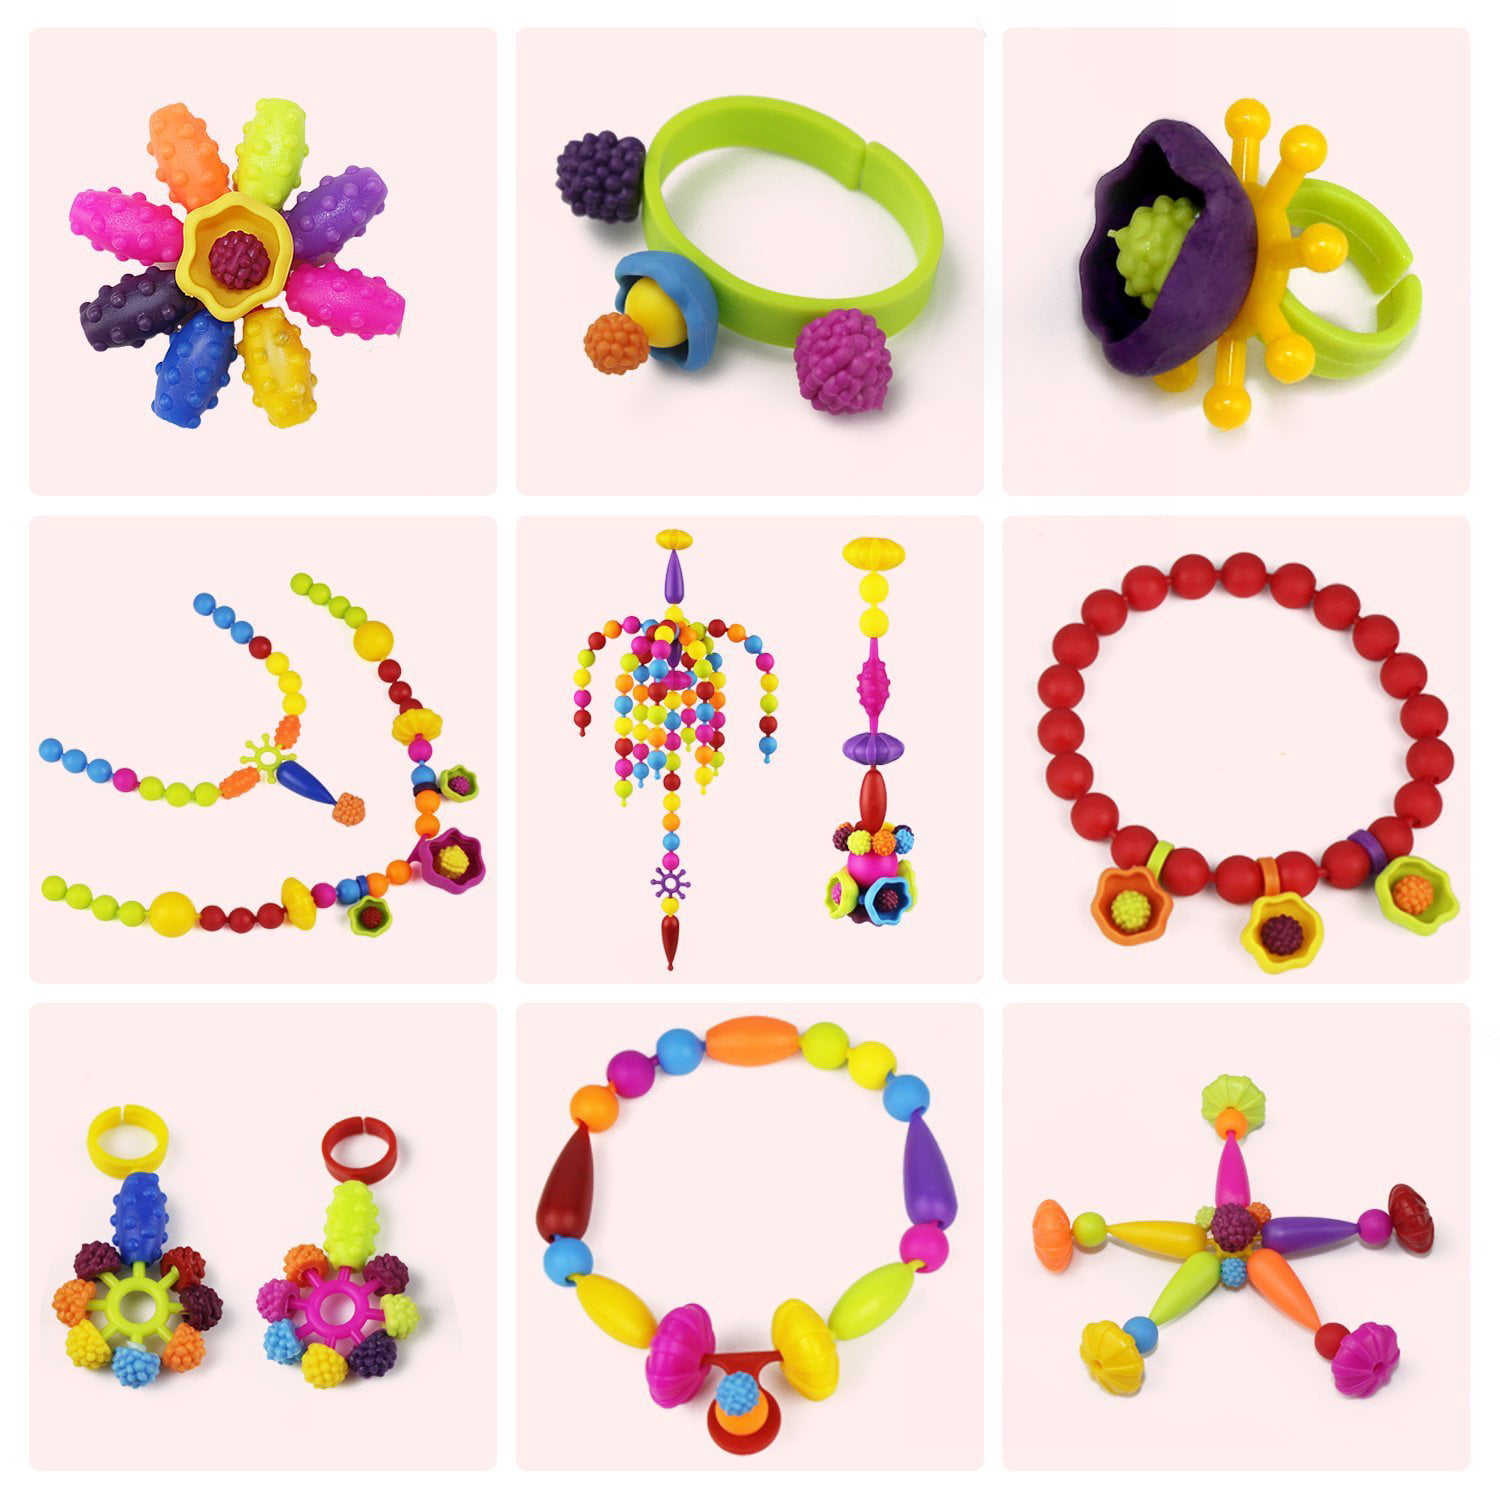  BIRANCO. Pop Beads, Jewelry Making Kit - Arts and Crafts for  Girls 3-7 Years Old, Snap Beads Toys - Necklace, Bracelet, Ring Creative  DIY Set - 520 pcs : Toys & Games